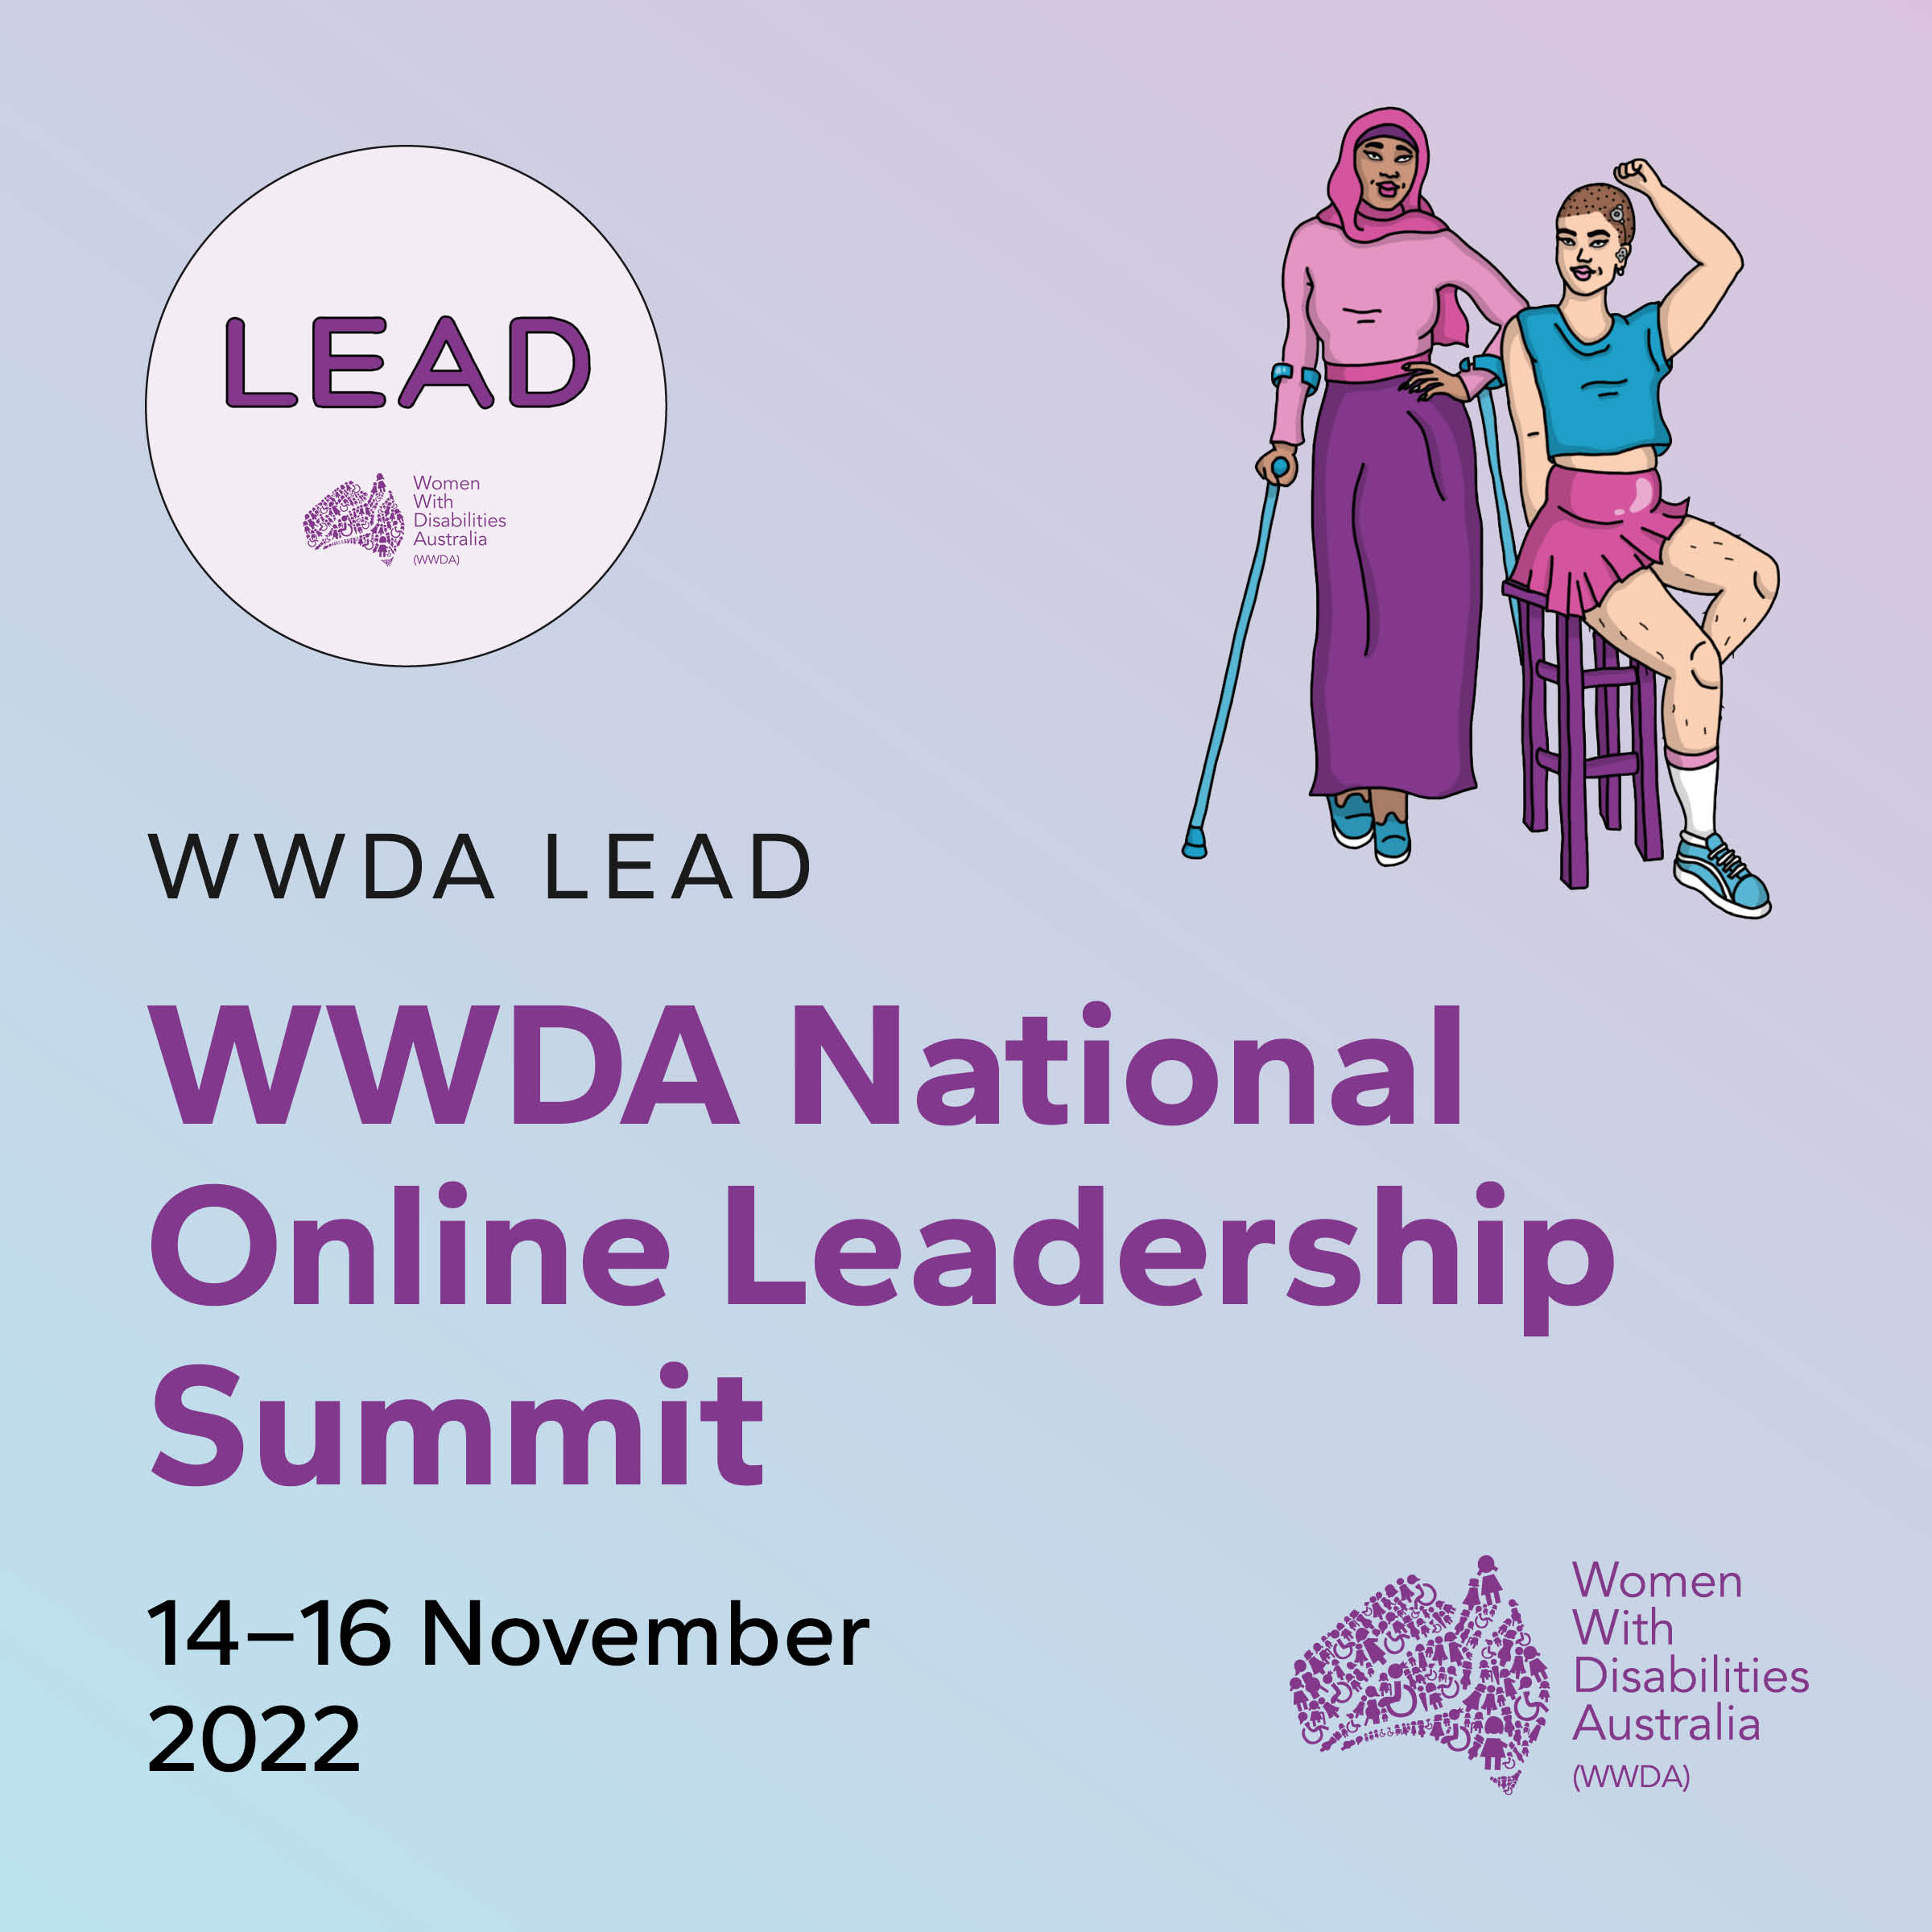 bluey-purple background, featuring two women with disabilities, one is sitting on a stool and the other one is standing using crutches, in the top left-hand corner Women With Disabilities Australia WWDA logo and in the centre is the LEAD logo, text reads "WWDA LEAD, WWDA National Online Leadership Summit, 14-16 November 2022".